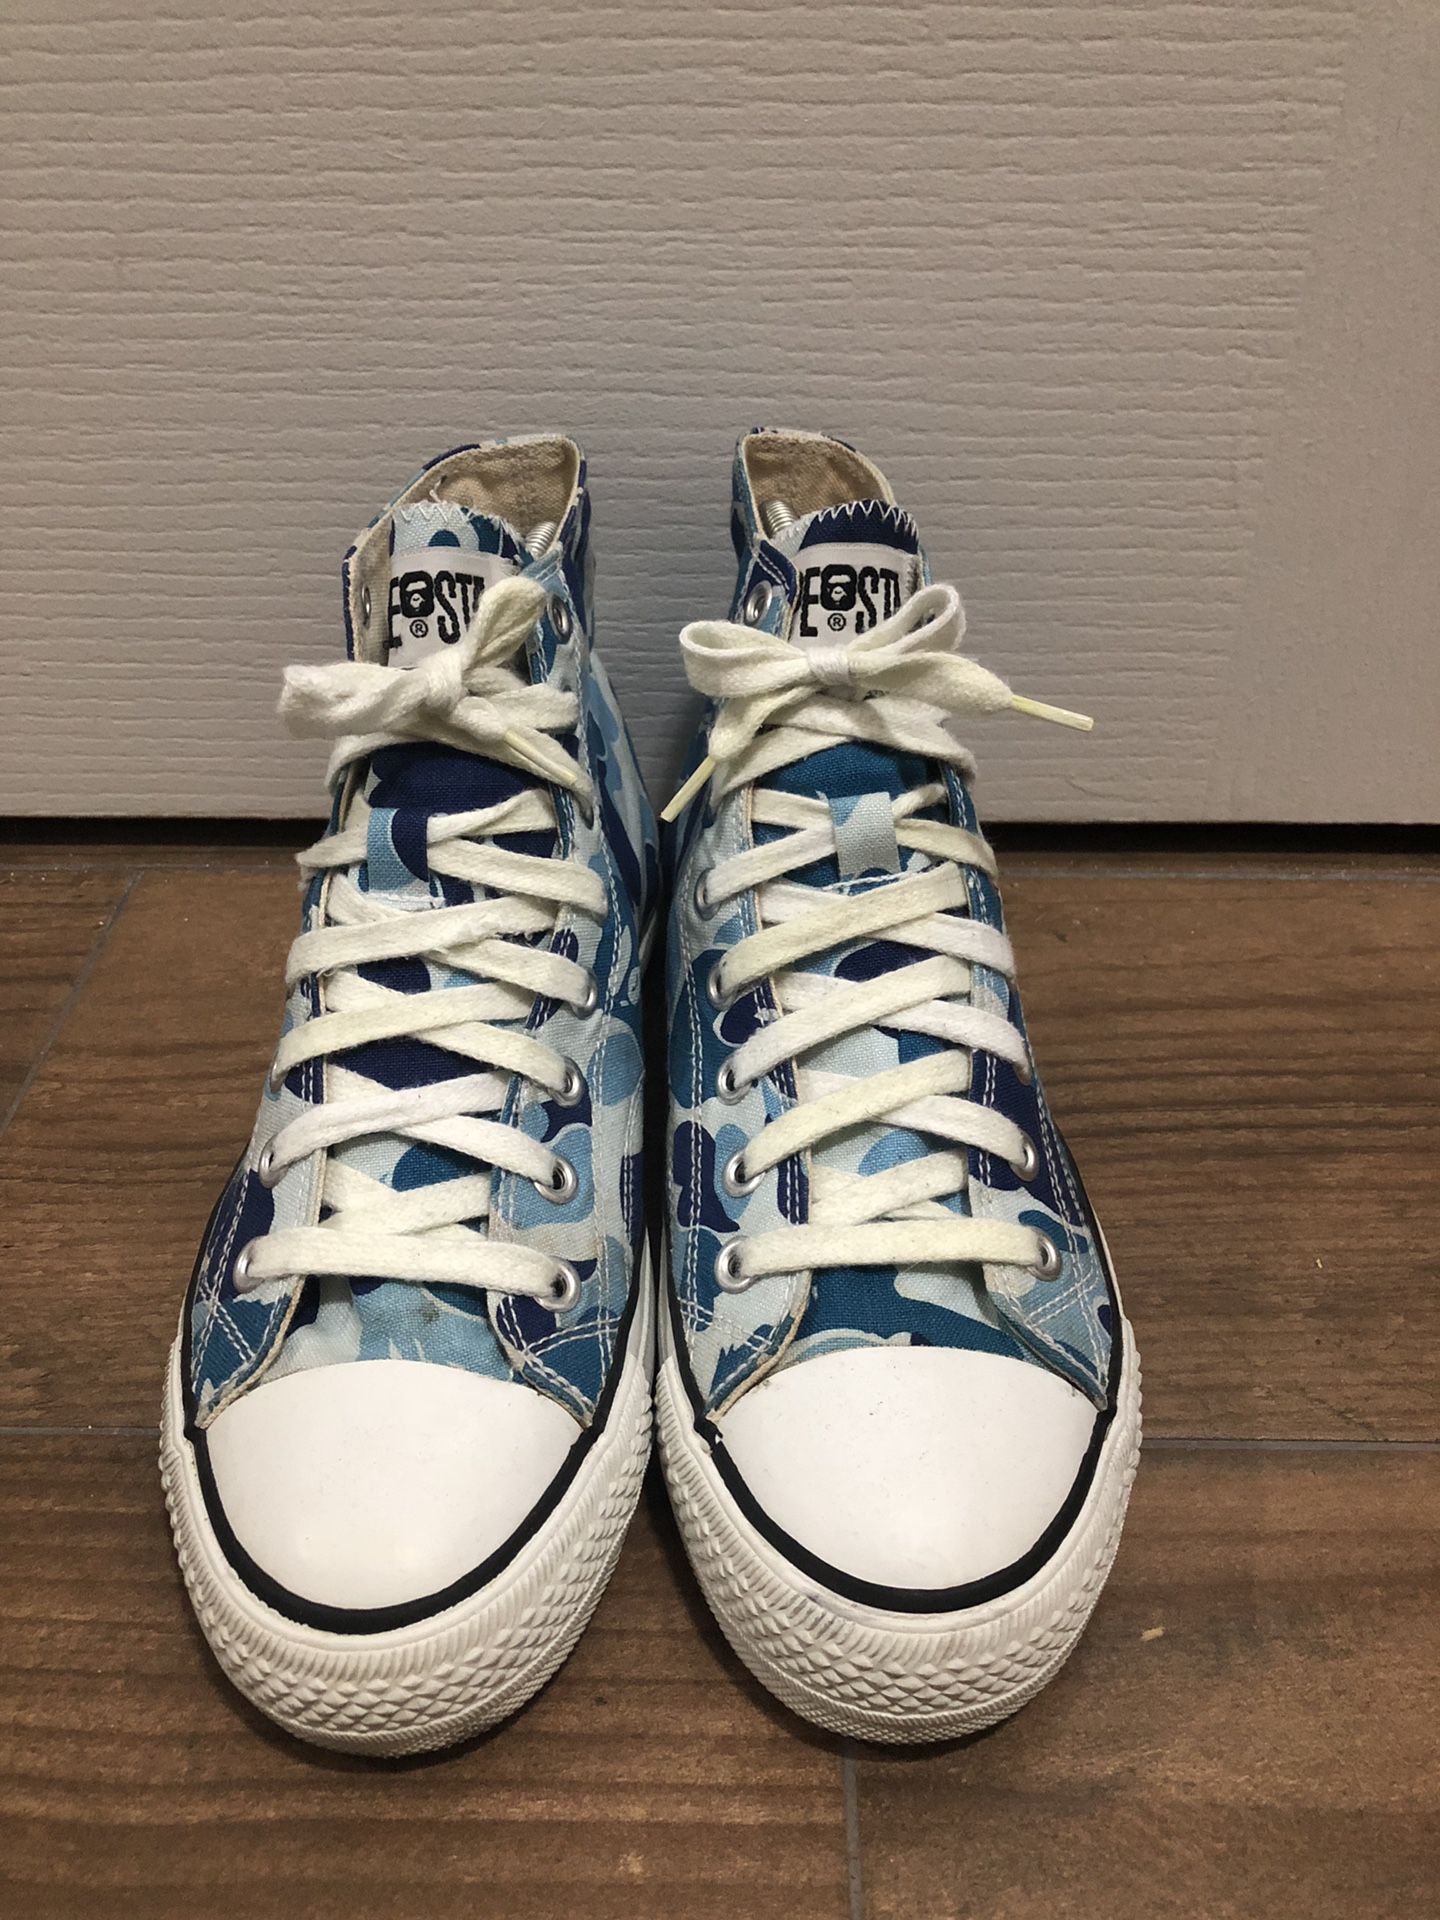 VINTAGE BAPE CONVERSE “BLUE CAMO” for Sale in New York, NY - OfferUp